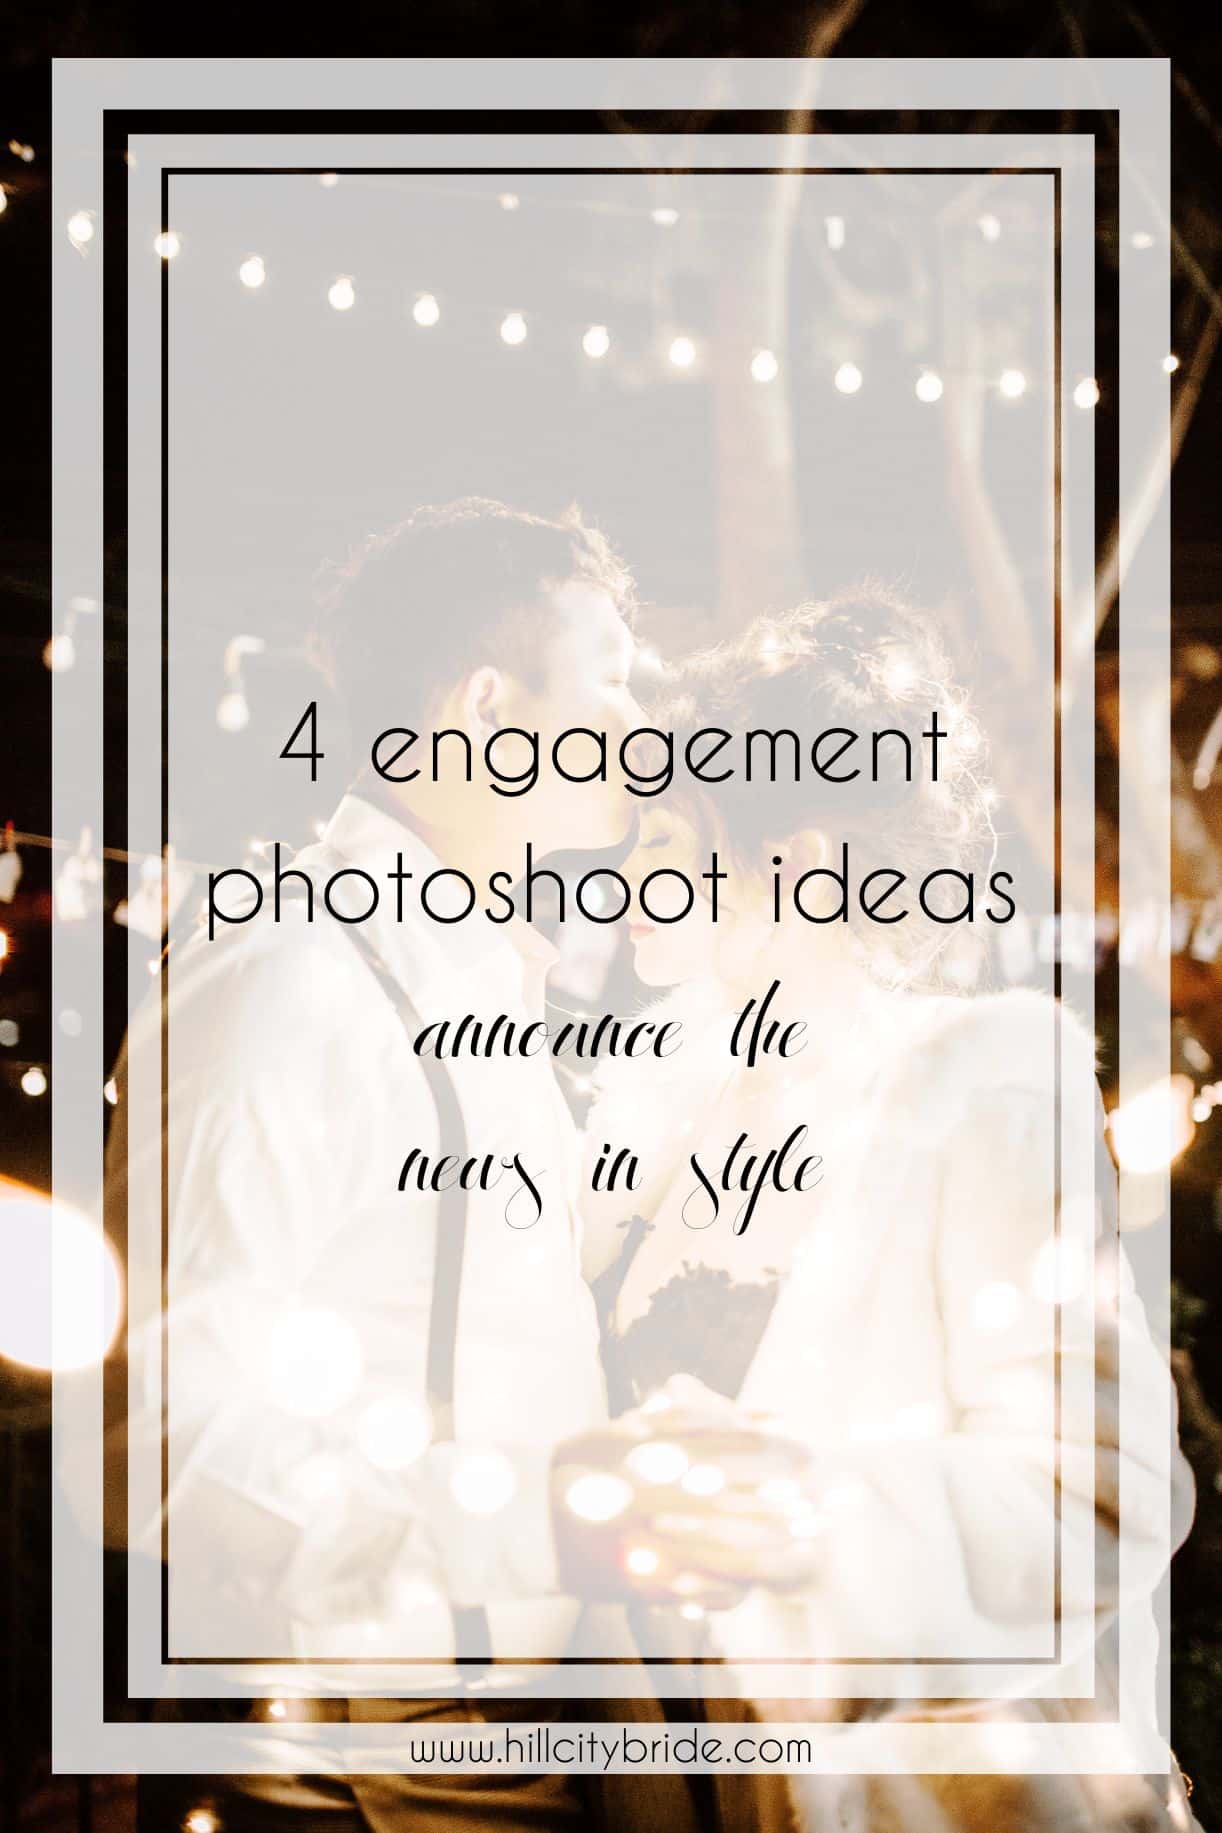 4 Engagement Photoshoot Ideas to Announce Your Proposal